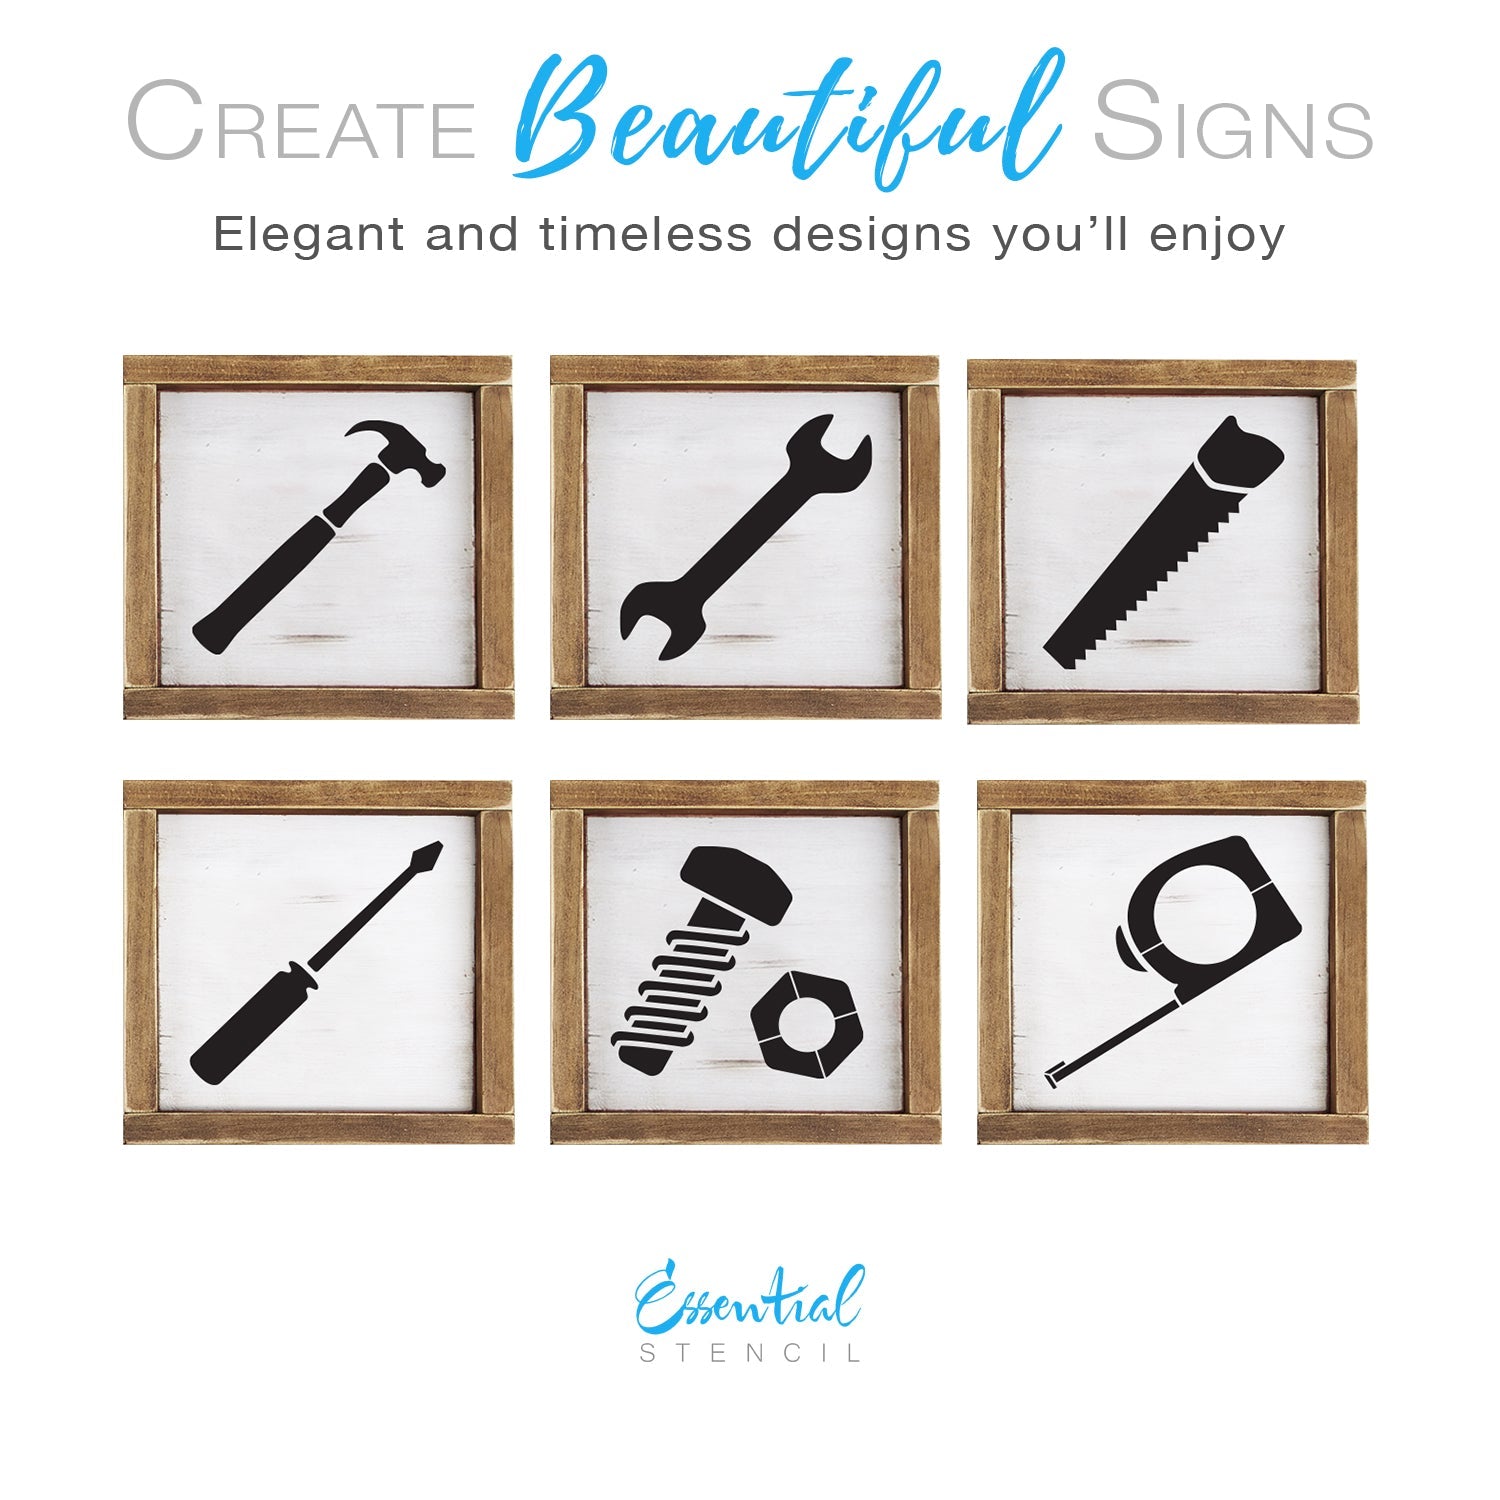 How to stencil onto wood with perfect results - Learn to create beautiful  things